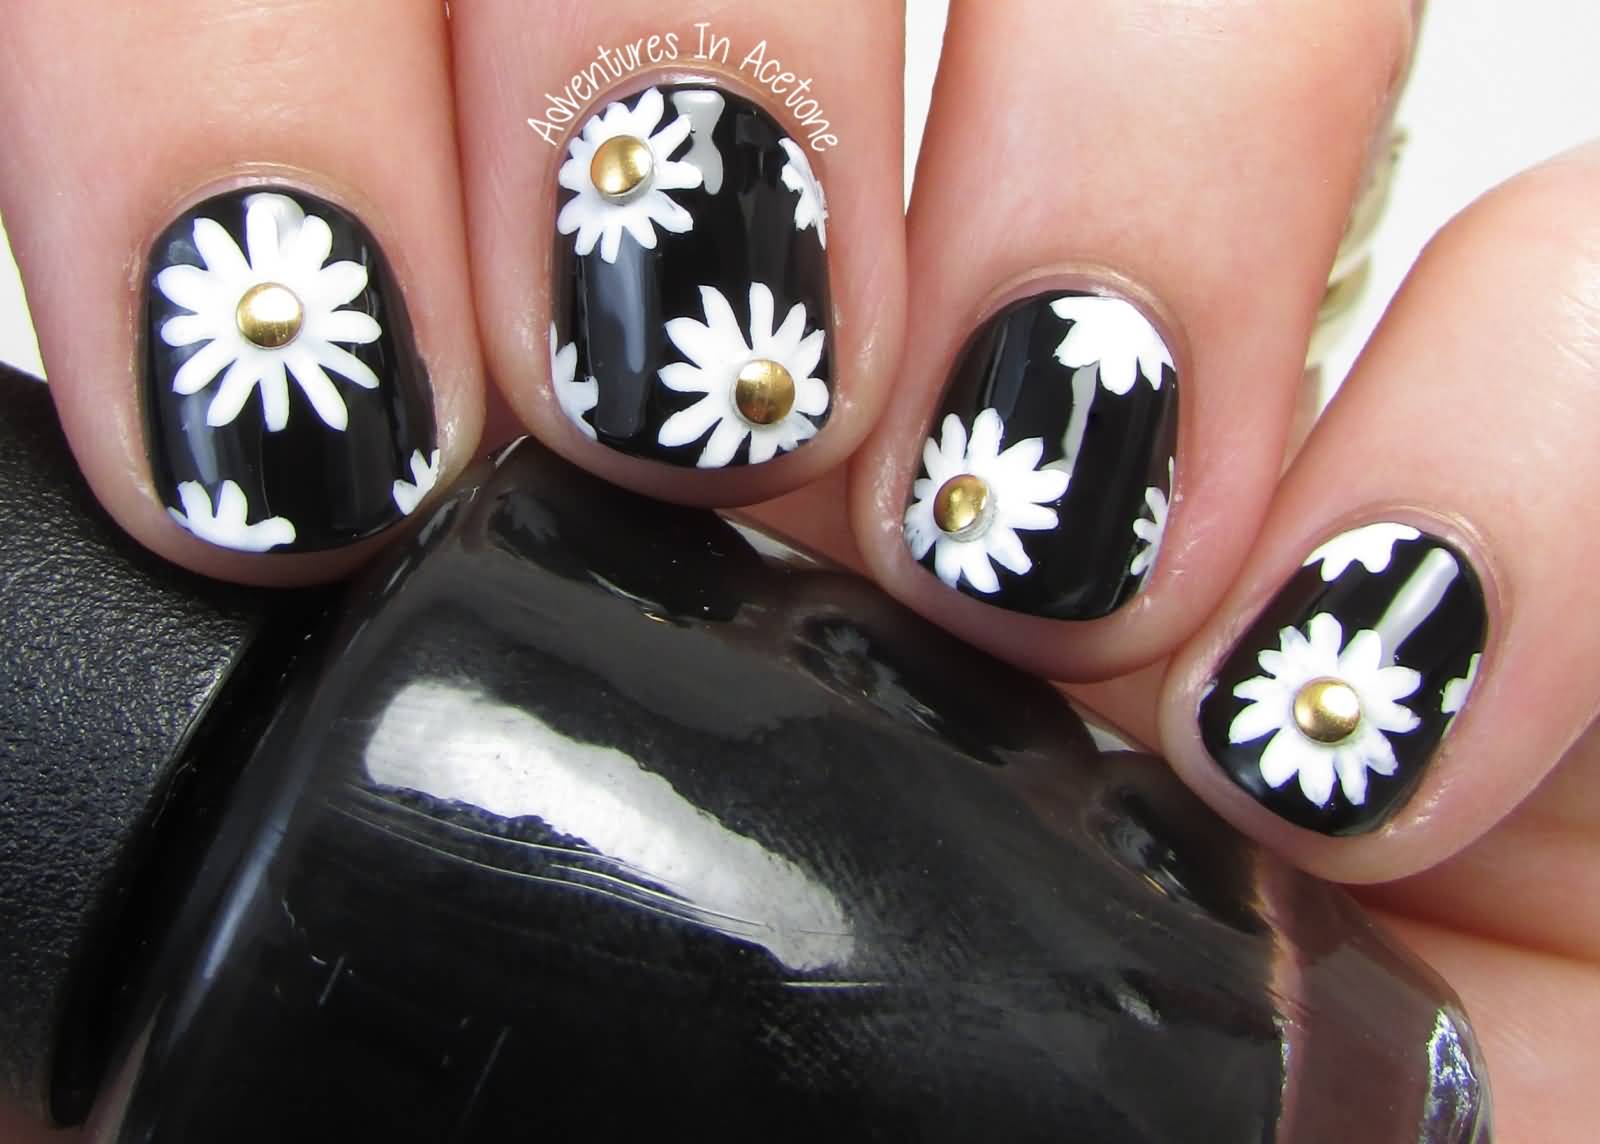 Black Glossy Nails With White Flowers And Caviar Beads Design Nail Art